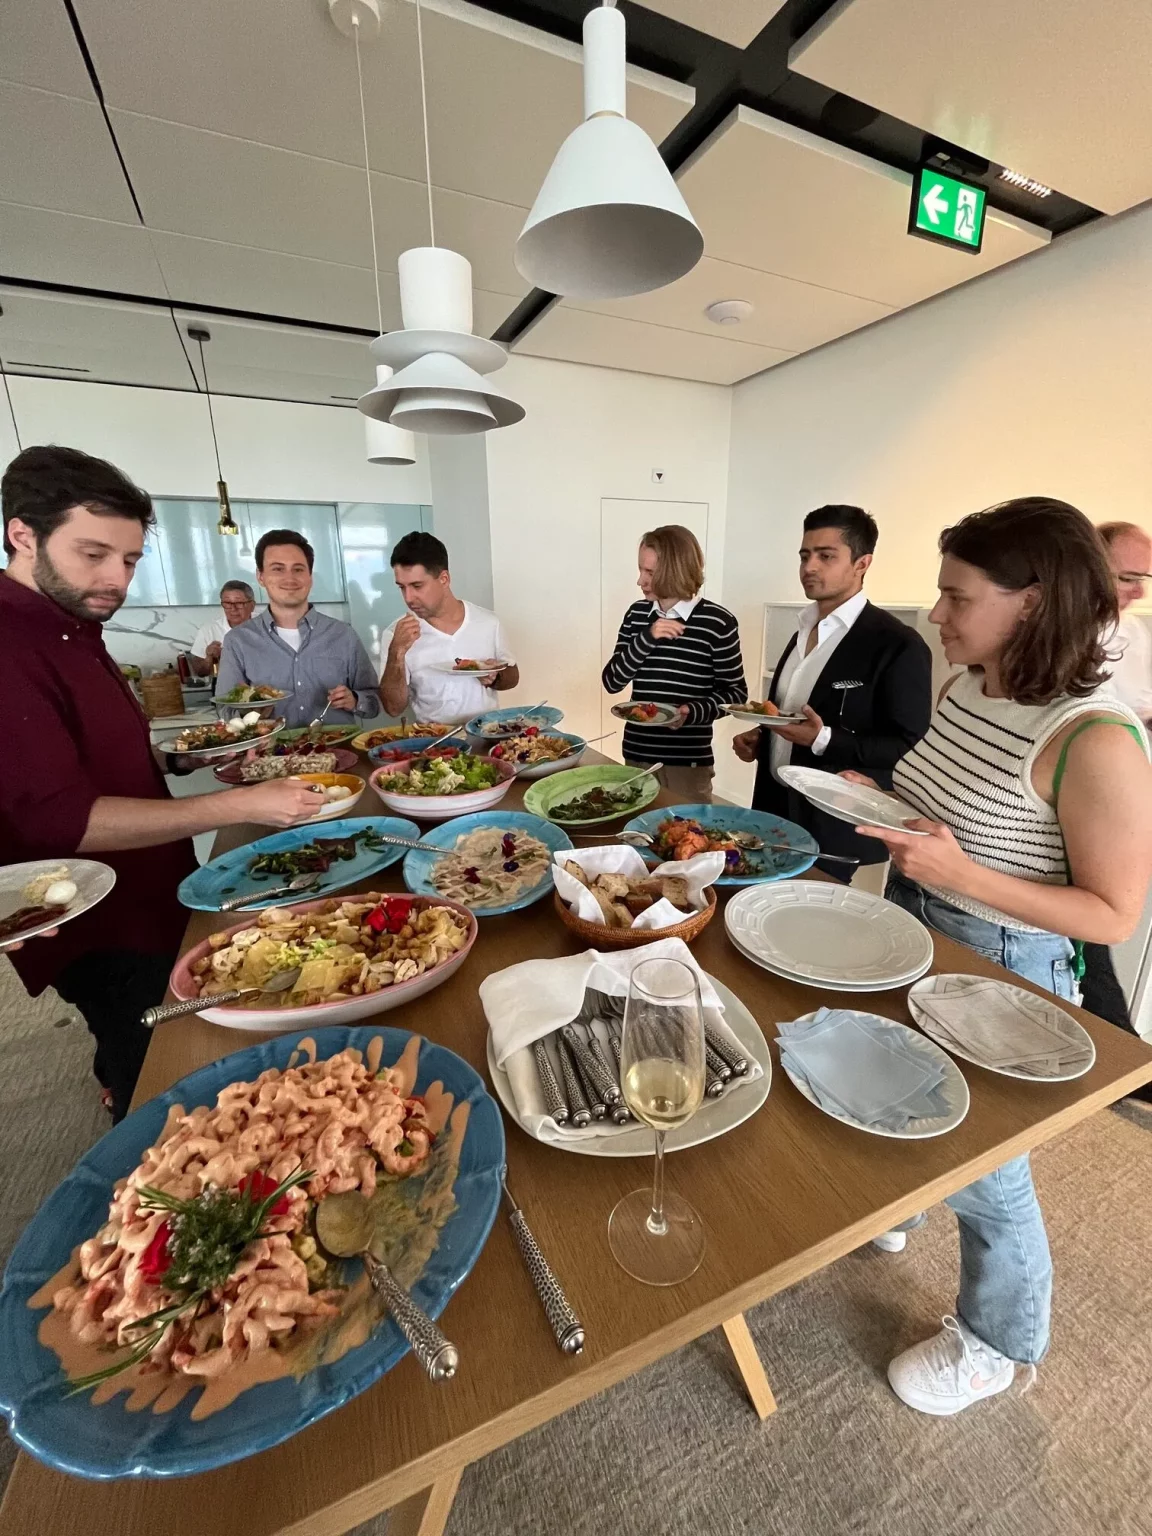 "Effixis team dinner in the swiss office, fostering camaraderie and a positive workplace atmosphere."